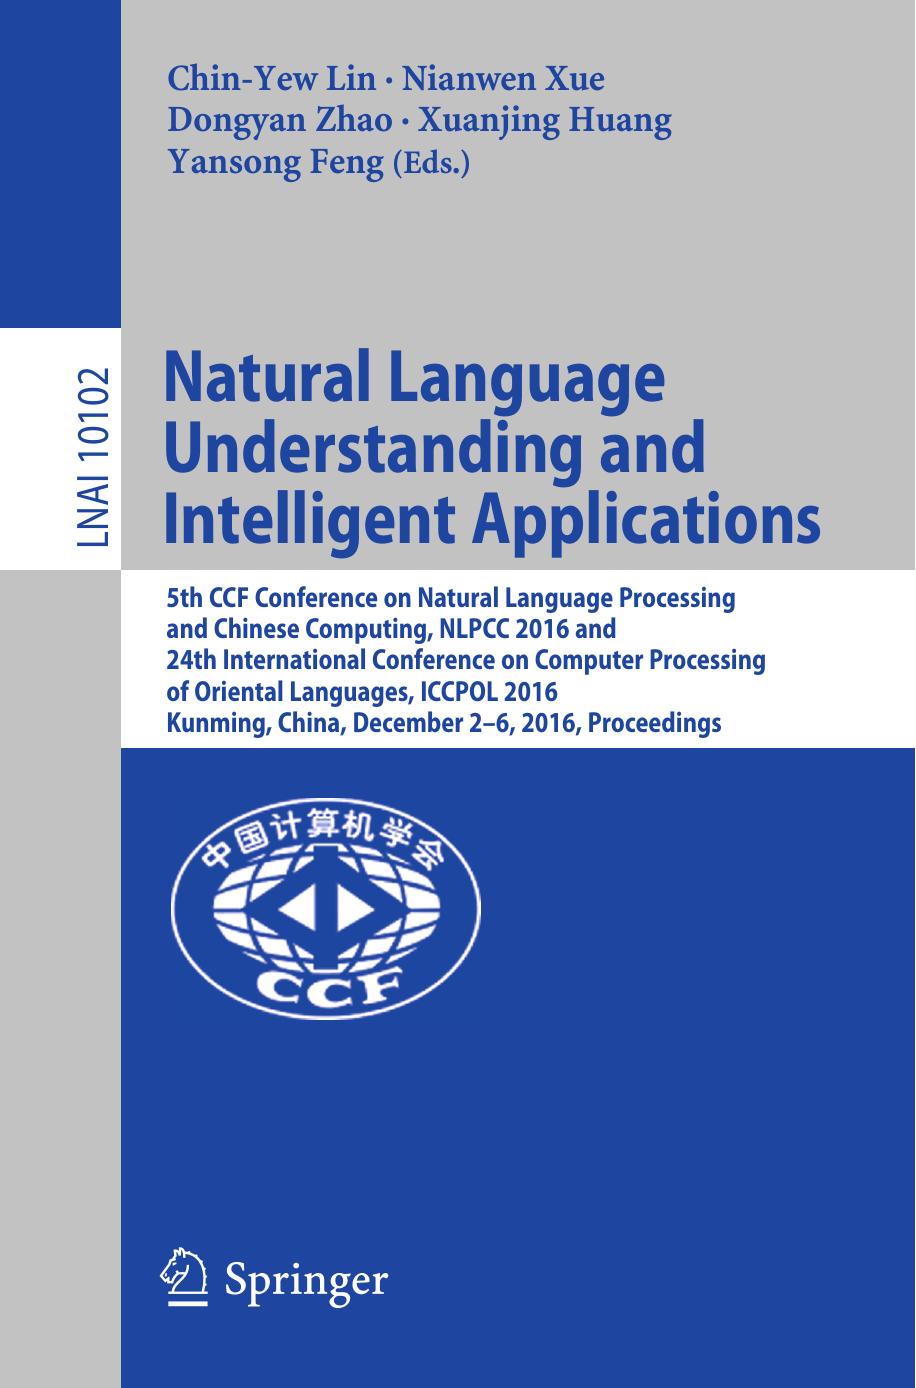 Natural Language Understanding and Intelligent Applications: 5th CCF Conference on Natural Language Processing and Chinese Computing, NLPCC 2016, and 24th International Conference on Computer Processing of Oriental Languages, ICCPOL 2016, Kunming, China, December 2–6, 2016, Proceedings